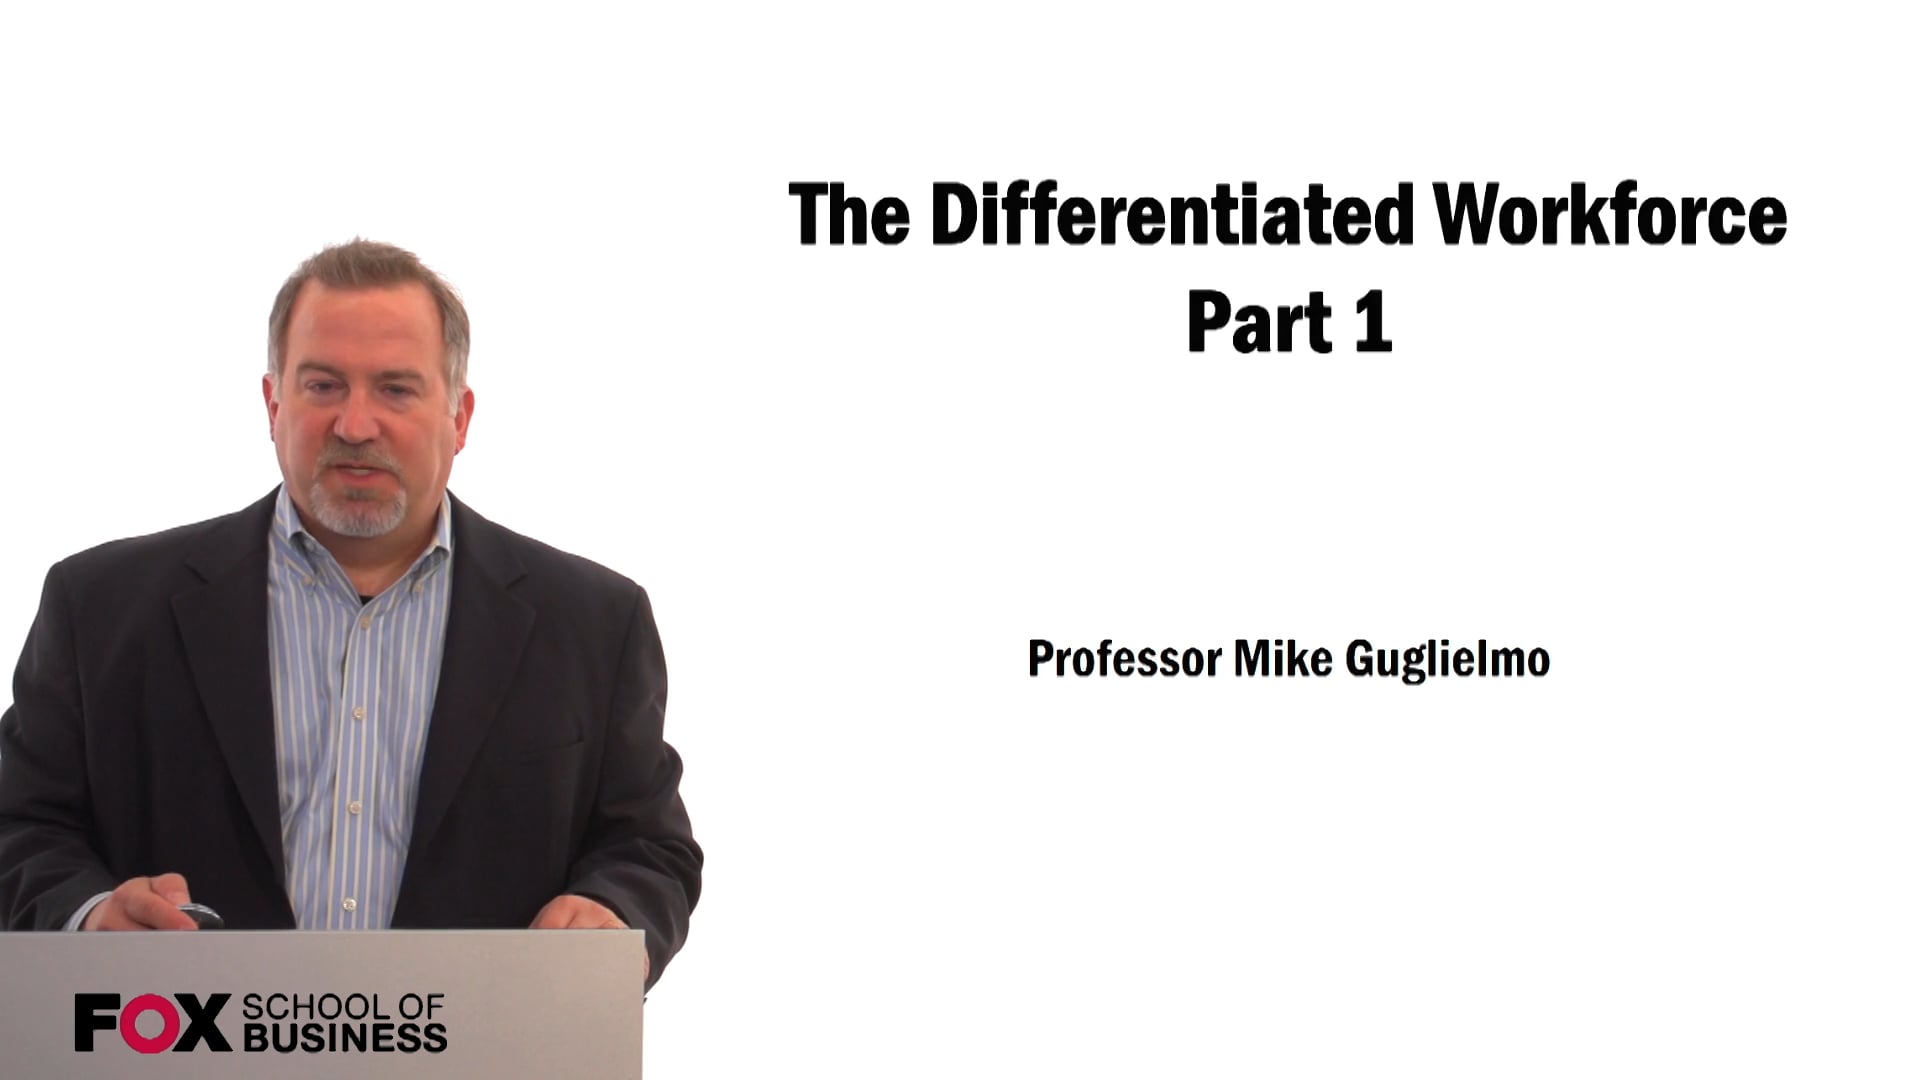 The Differentiated Workforce Part 1